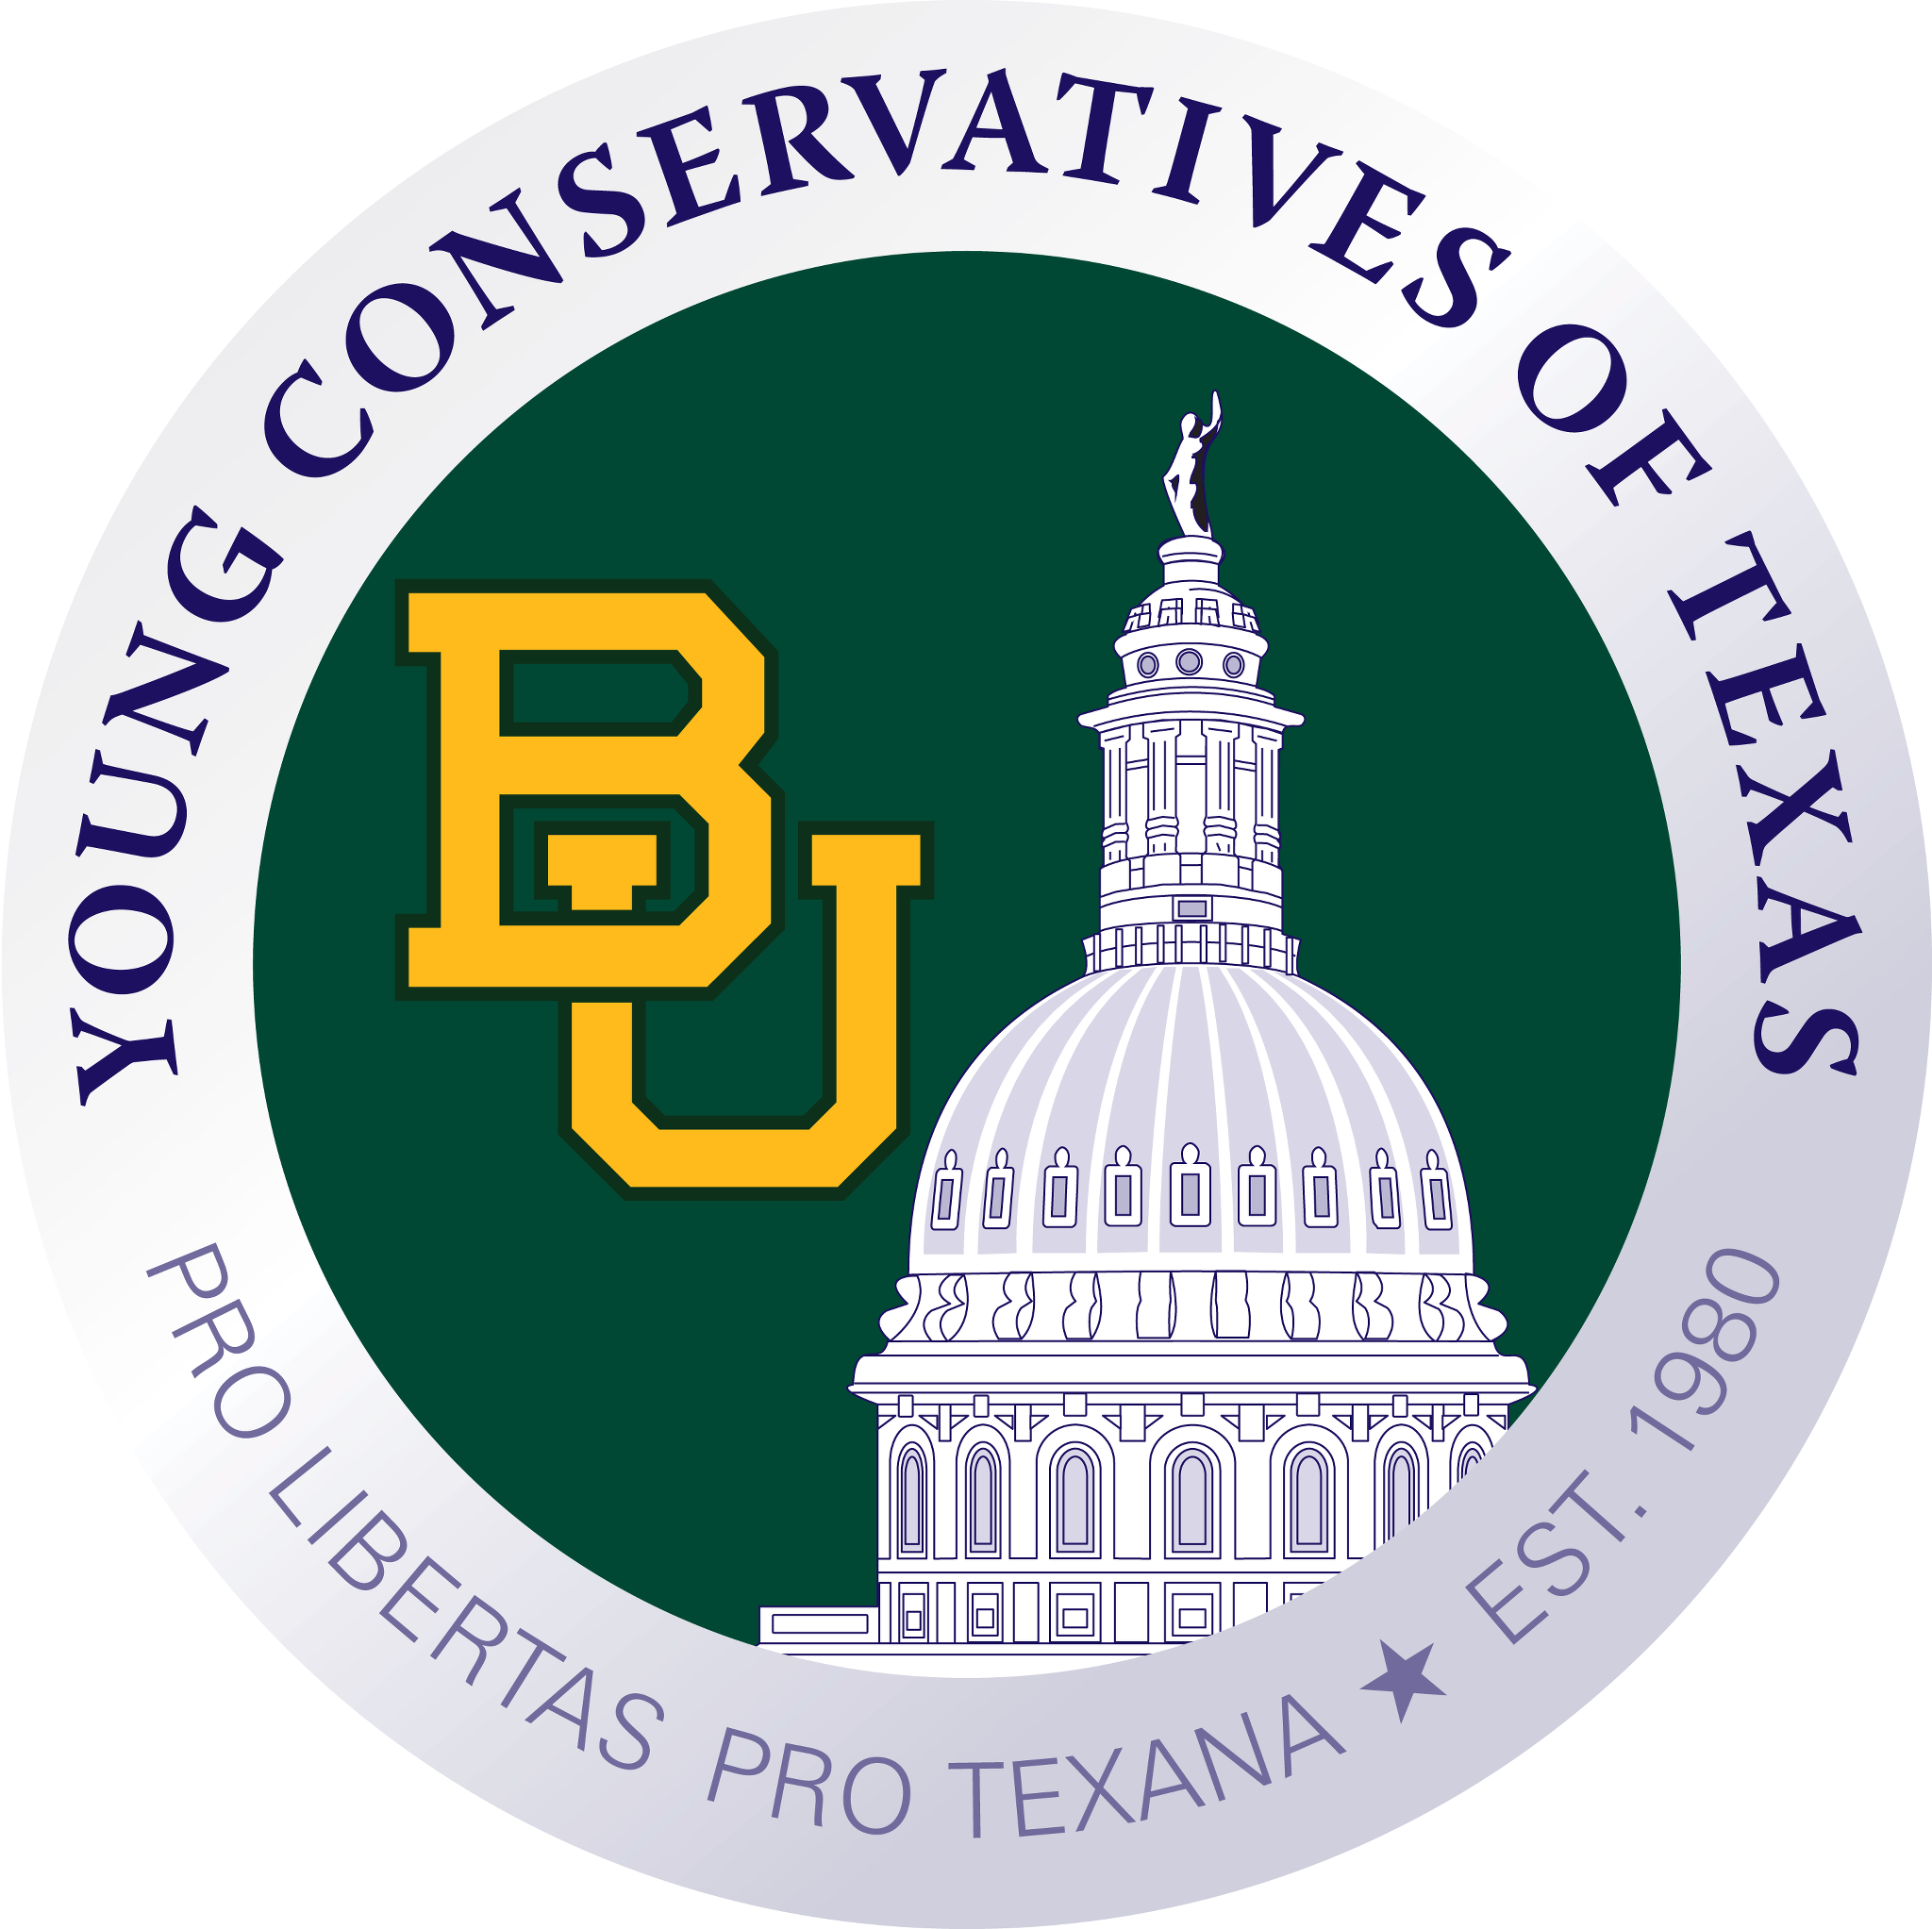 Baylor University | Young Conservatives of Texas2048 x 2045